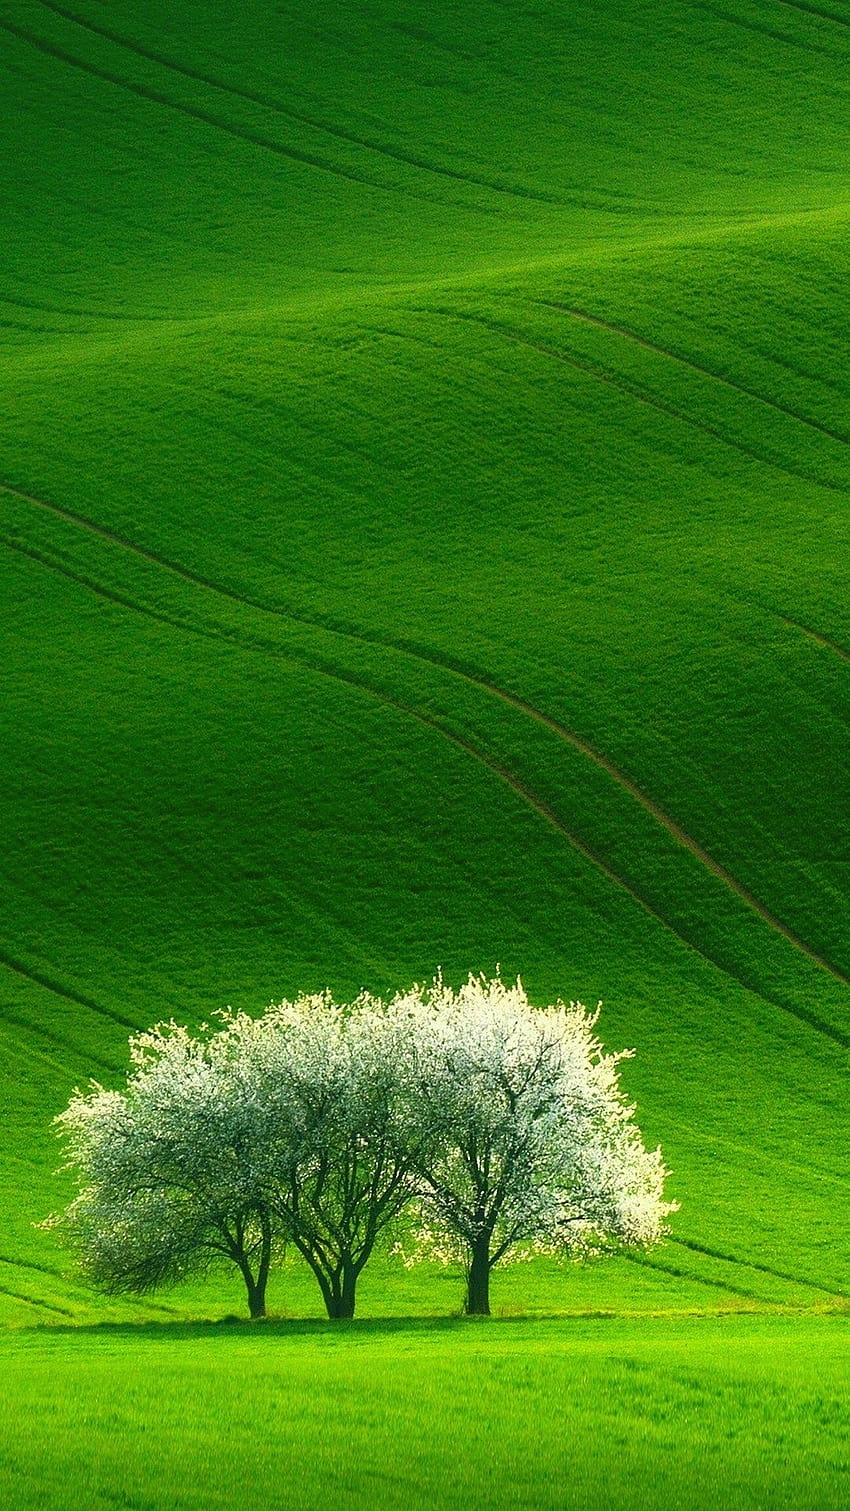 Green Beautiful Nature Scenery Android ⋆ Traxzee, green scenery android mobile HD phone wallpaper